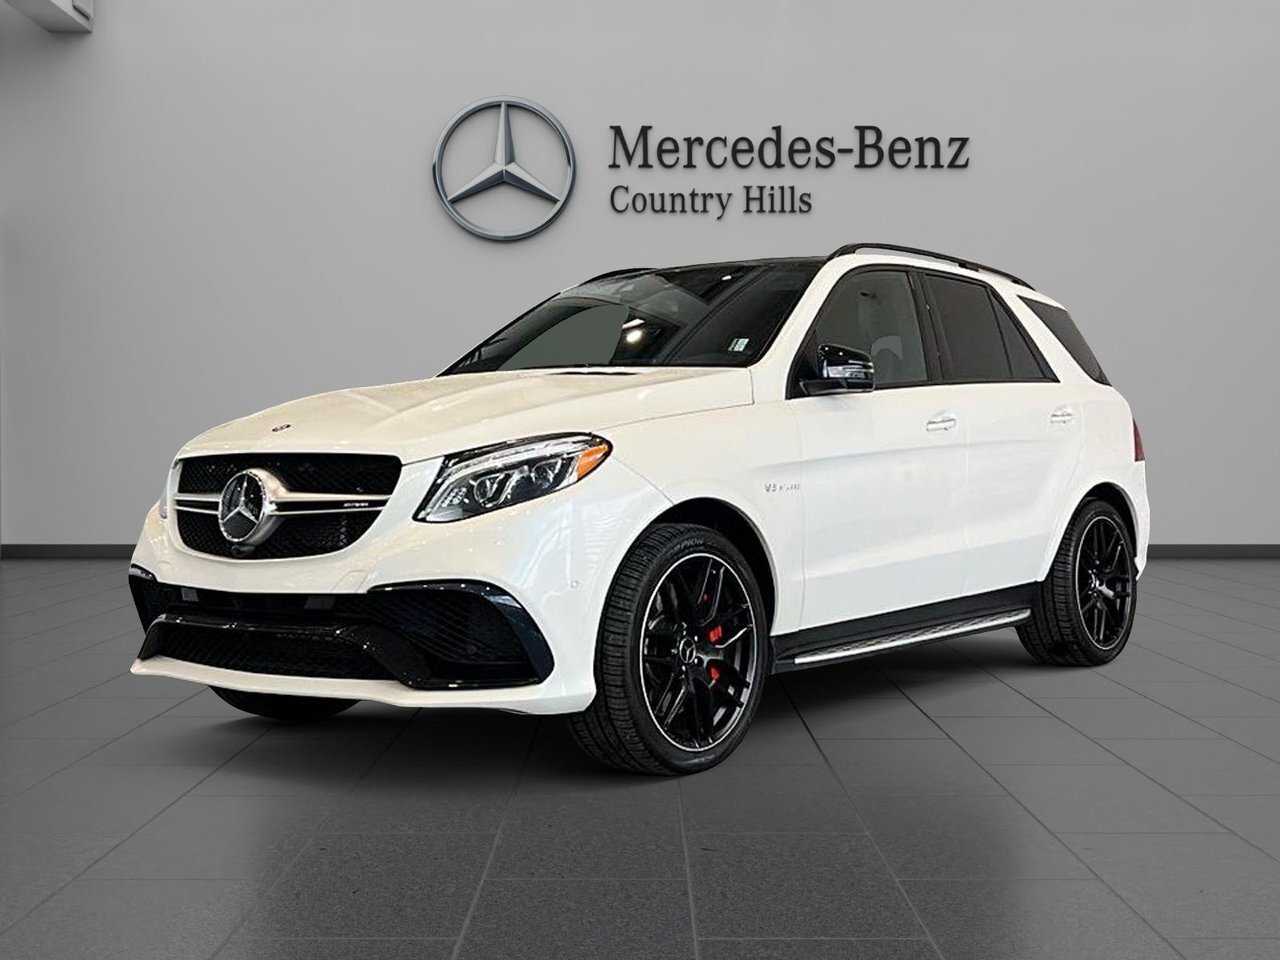 2016 Mercedes-Benz GLE63 AMG S 4MATIC One of a kind AMG! $131,240 new!